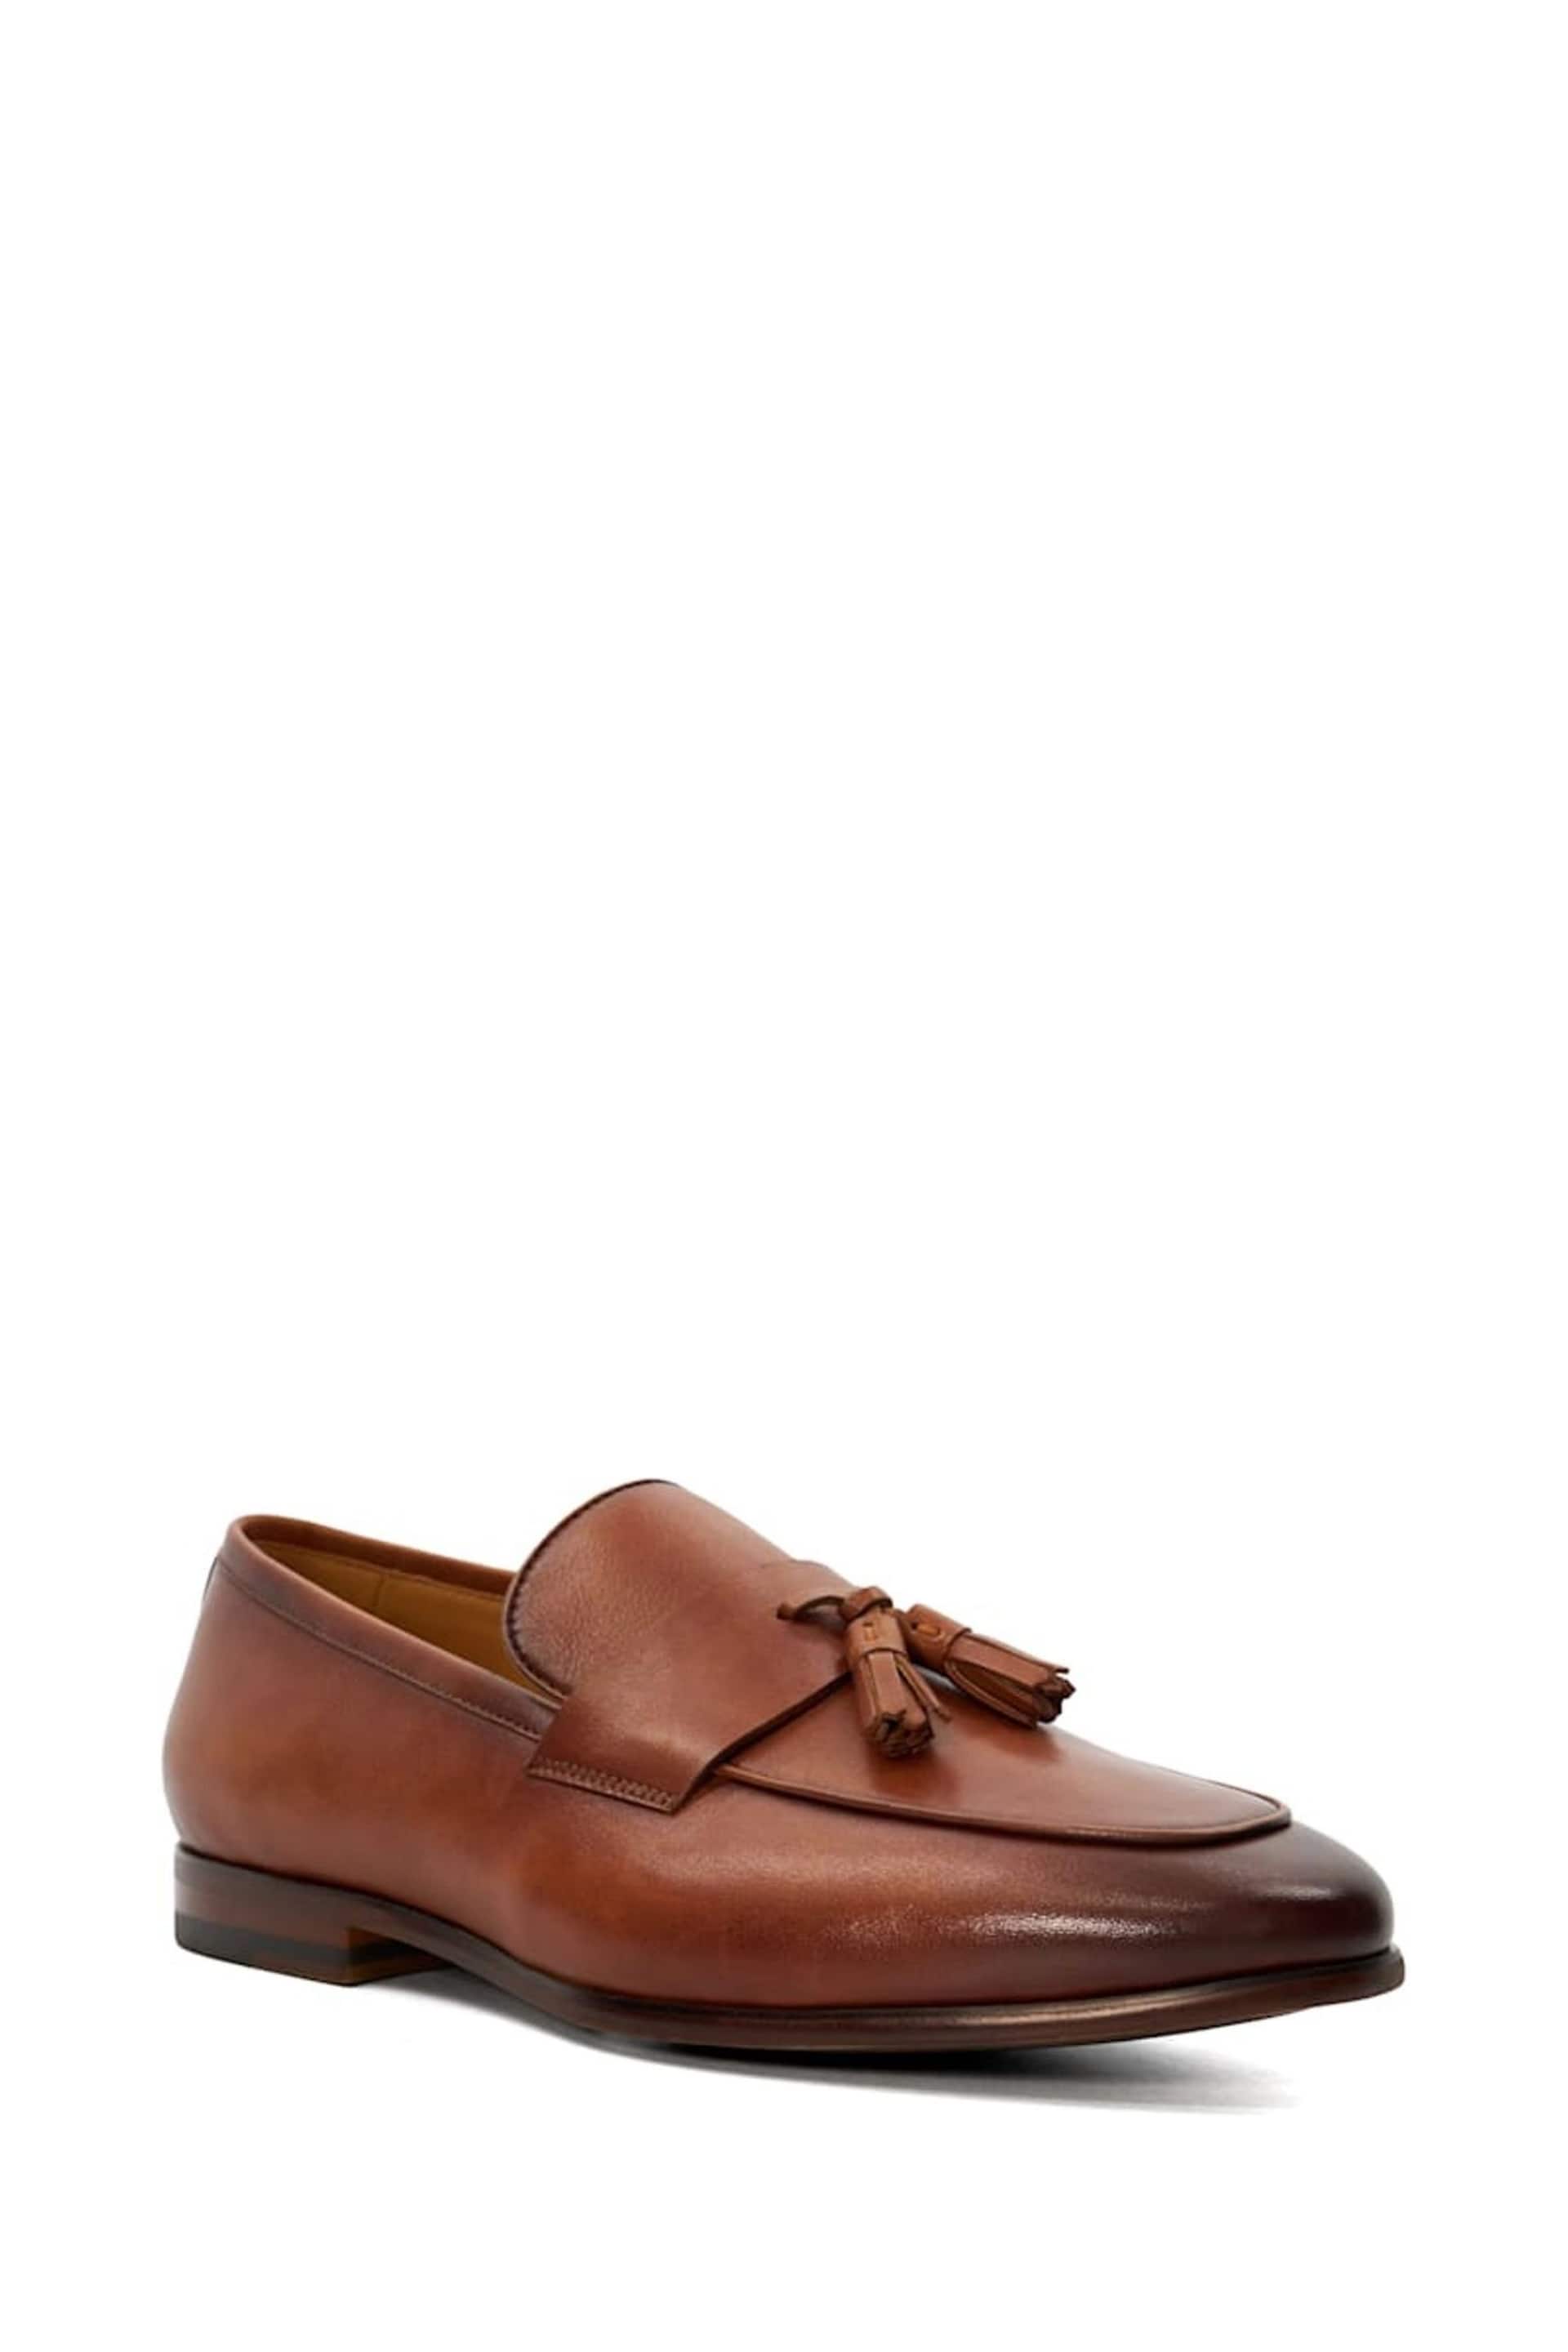 Dune London Brown Saxxton Tassel Loafers - Image 6 of 7